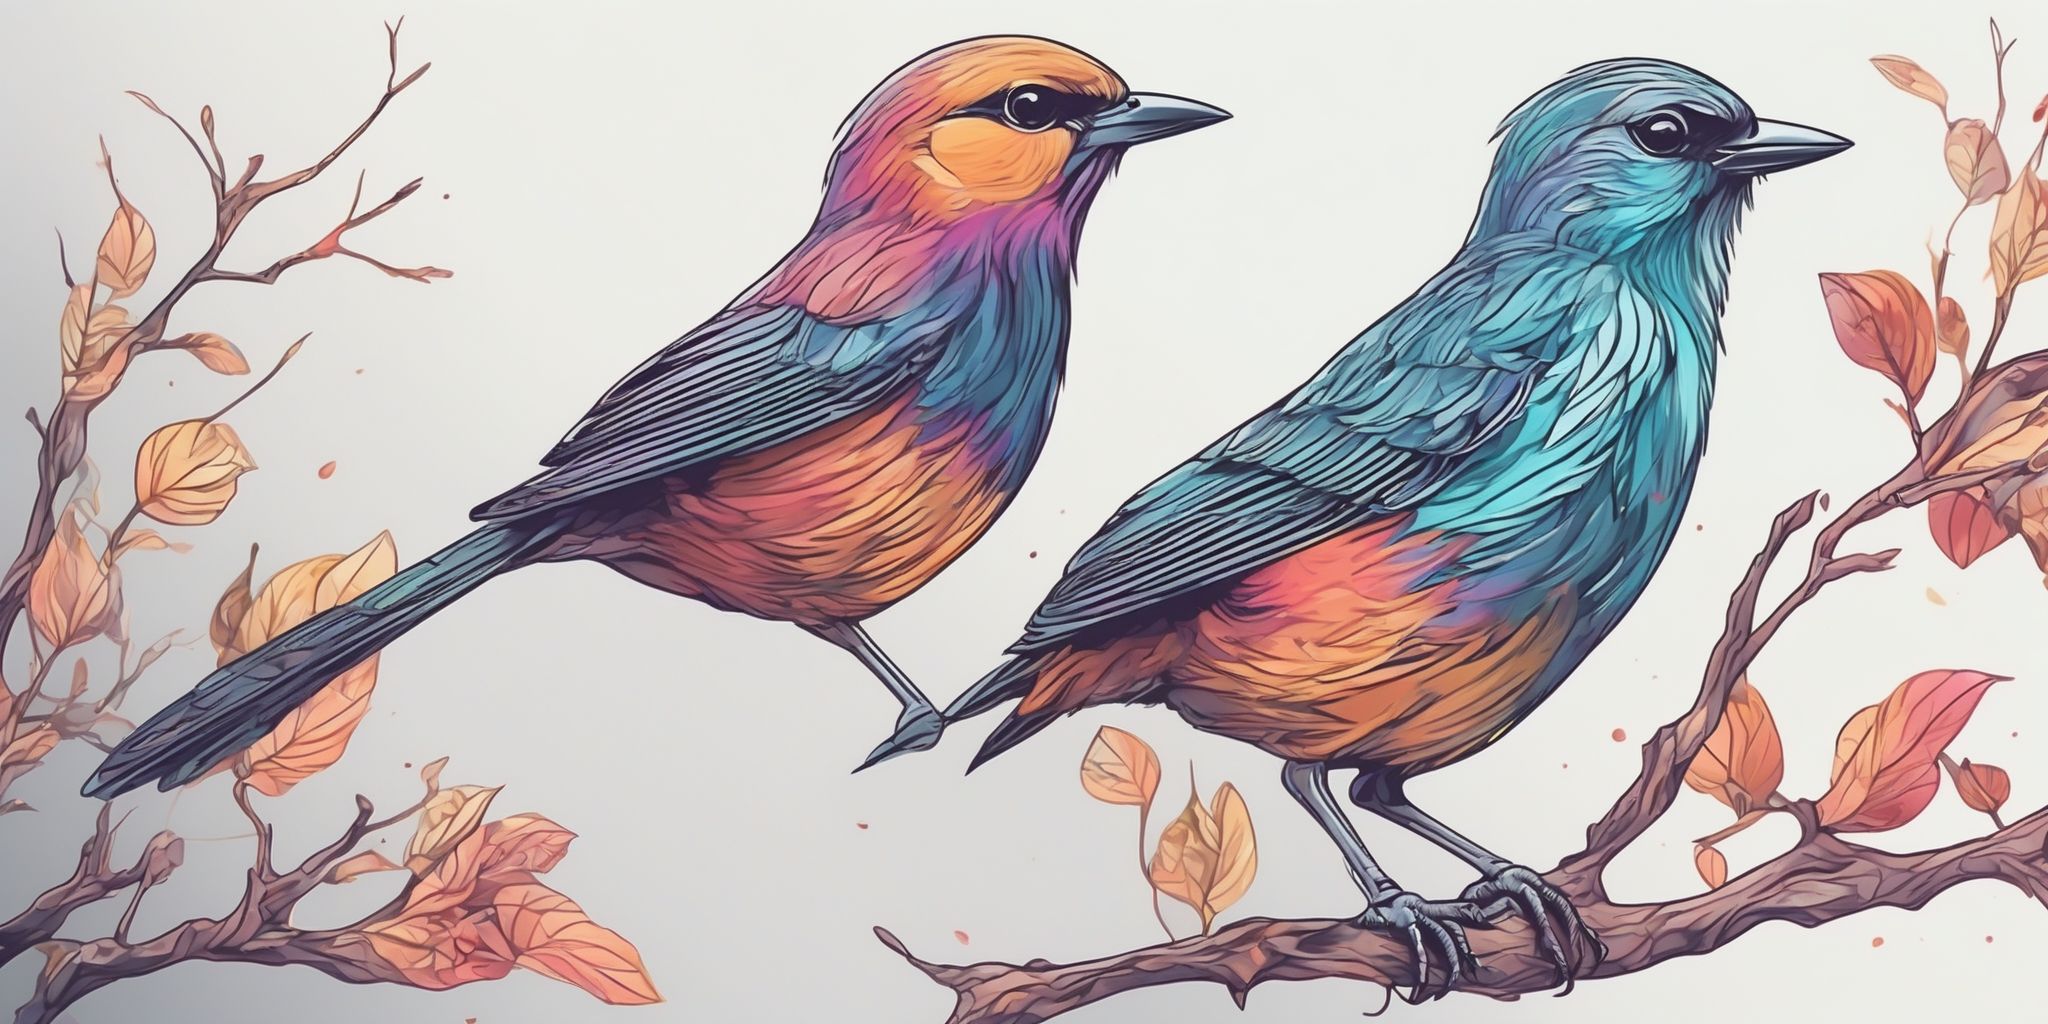 bird in illustration style with gradients and white background